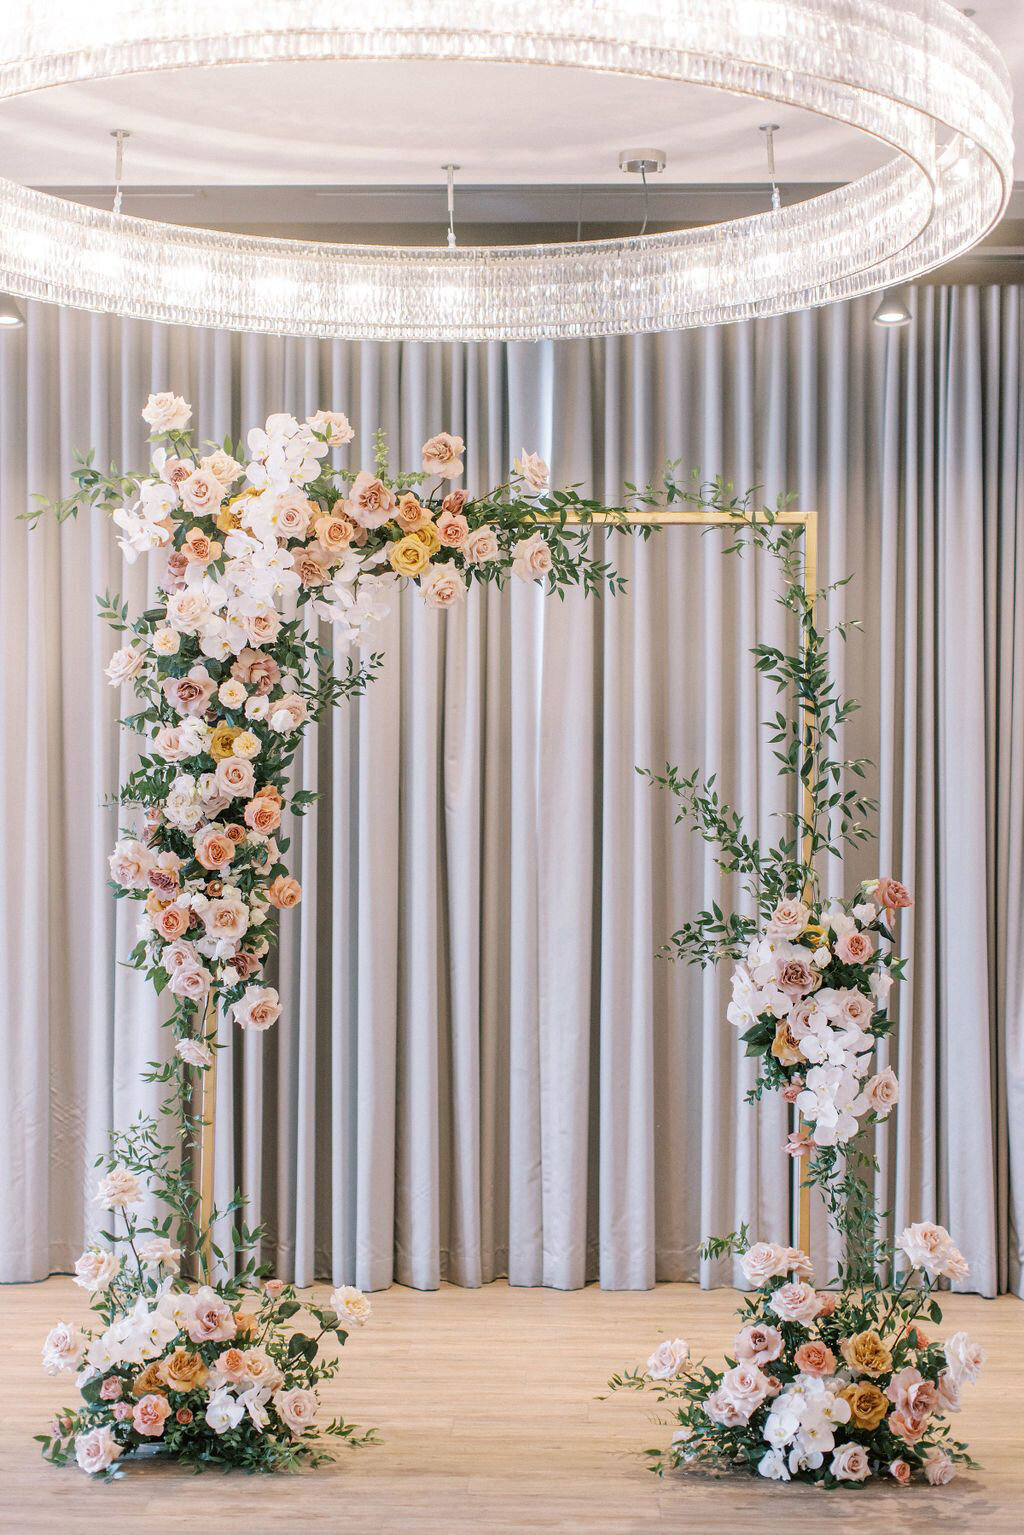 Stunning and elegant ceremony backdrop styled by CNC Event Design, modern and elegant wedding planner based in Calgary, Alberta.  Featured on the Brontë Bride Vendor Guide.